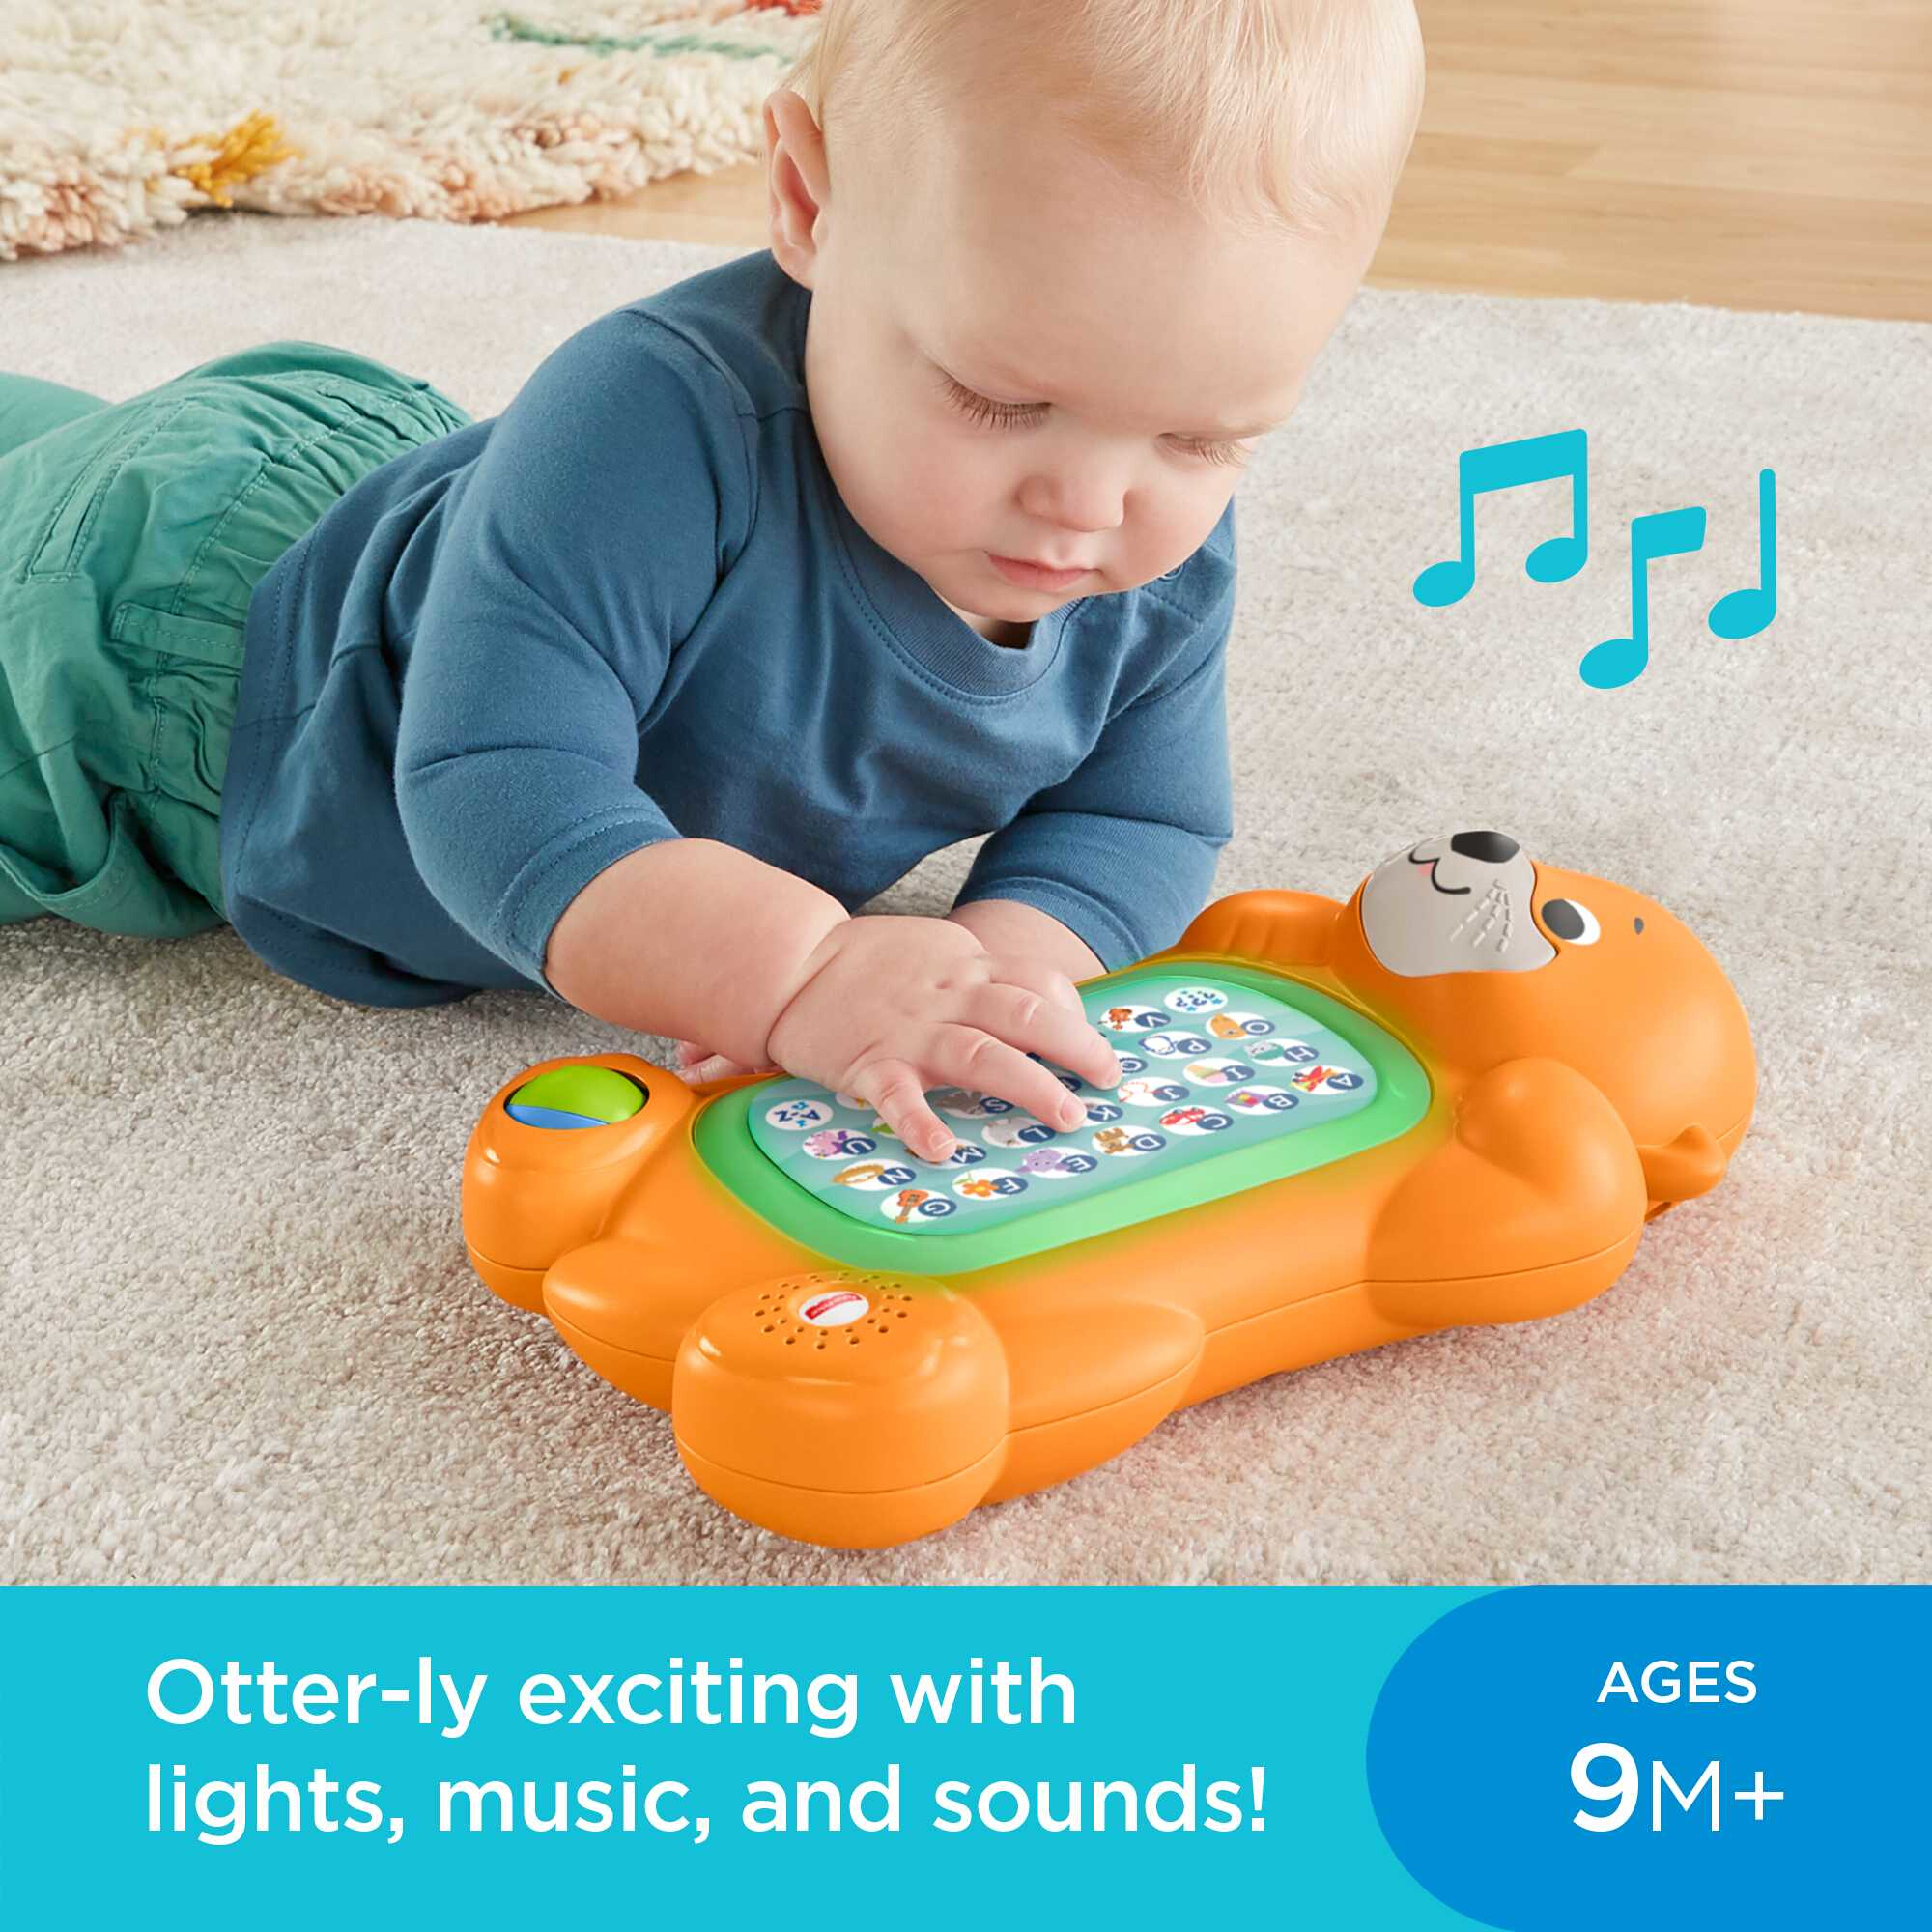 Fisher-Price Linkimals A to Z Otter Baby Electronic Learning Toy with Interactive Music & Lights - image 4 of 7